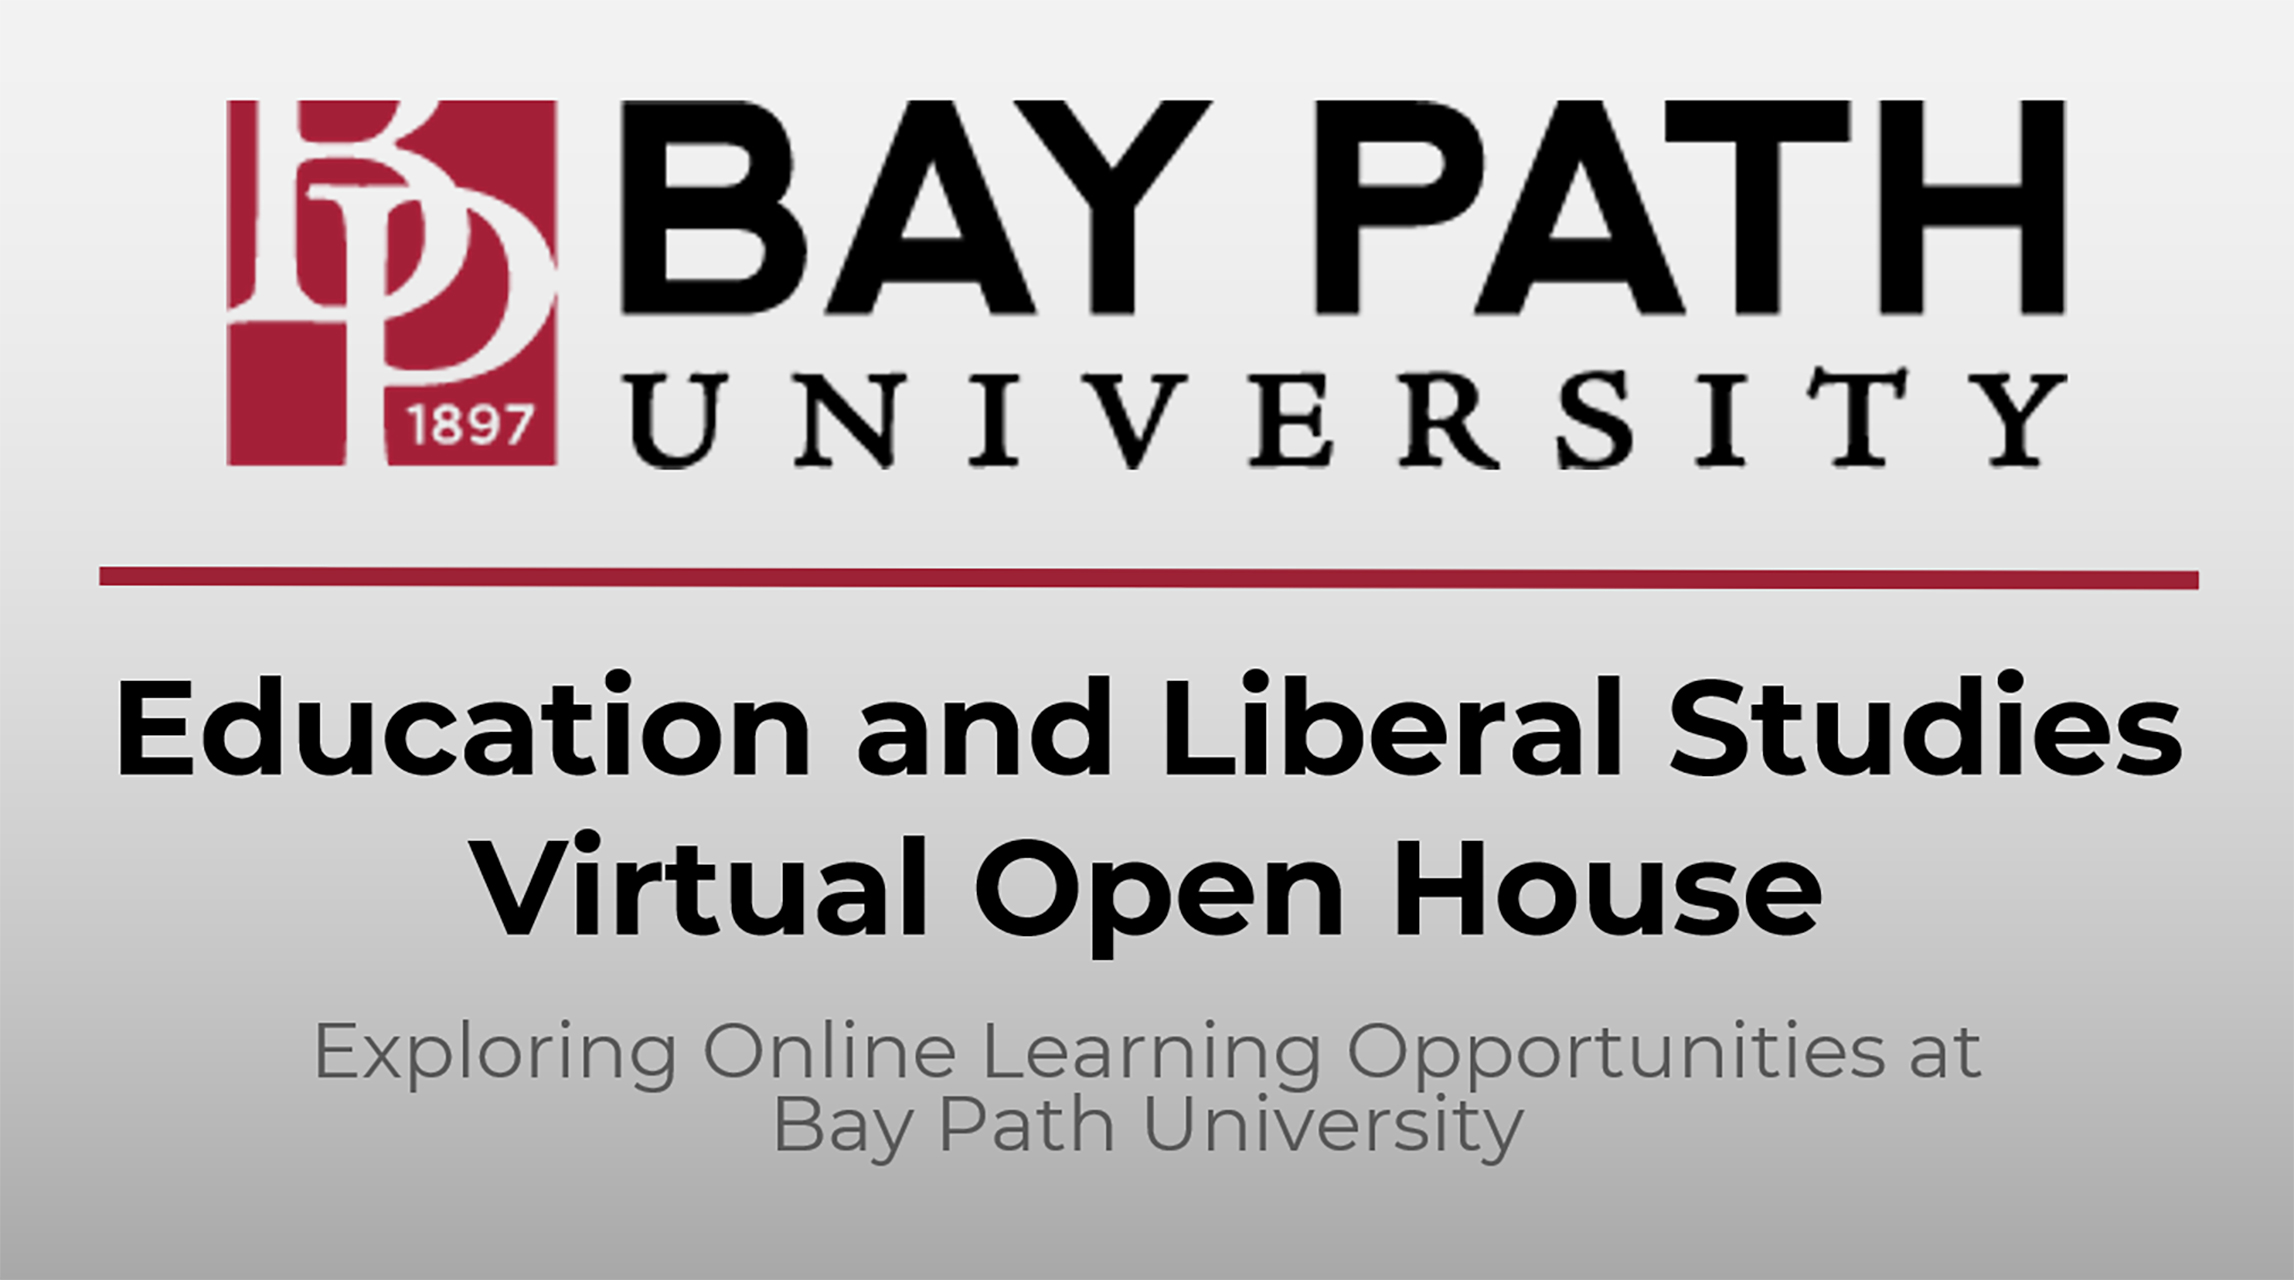 Education and Liberal Studies Virtual Open House